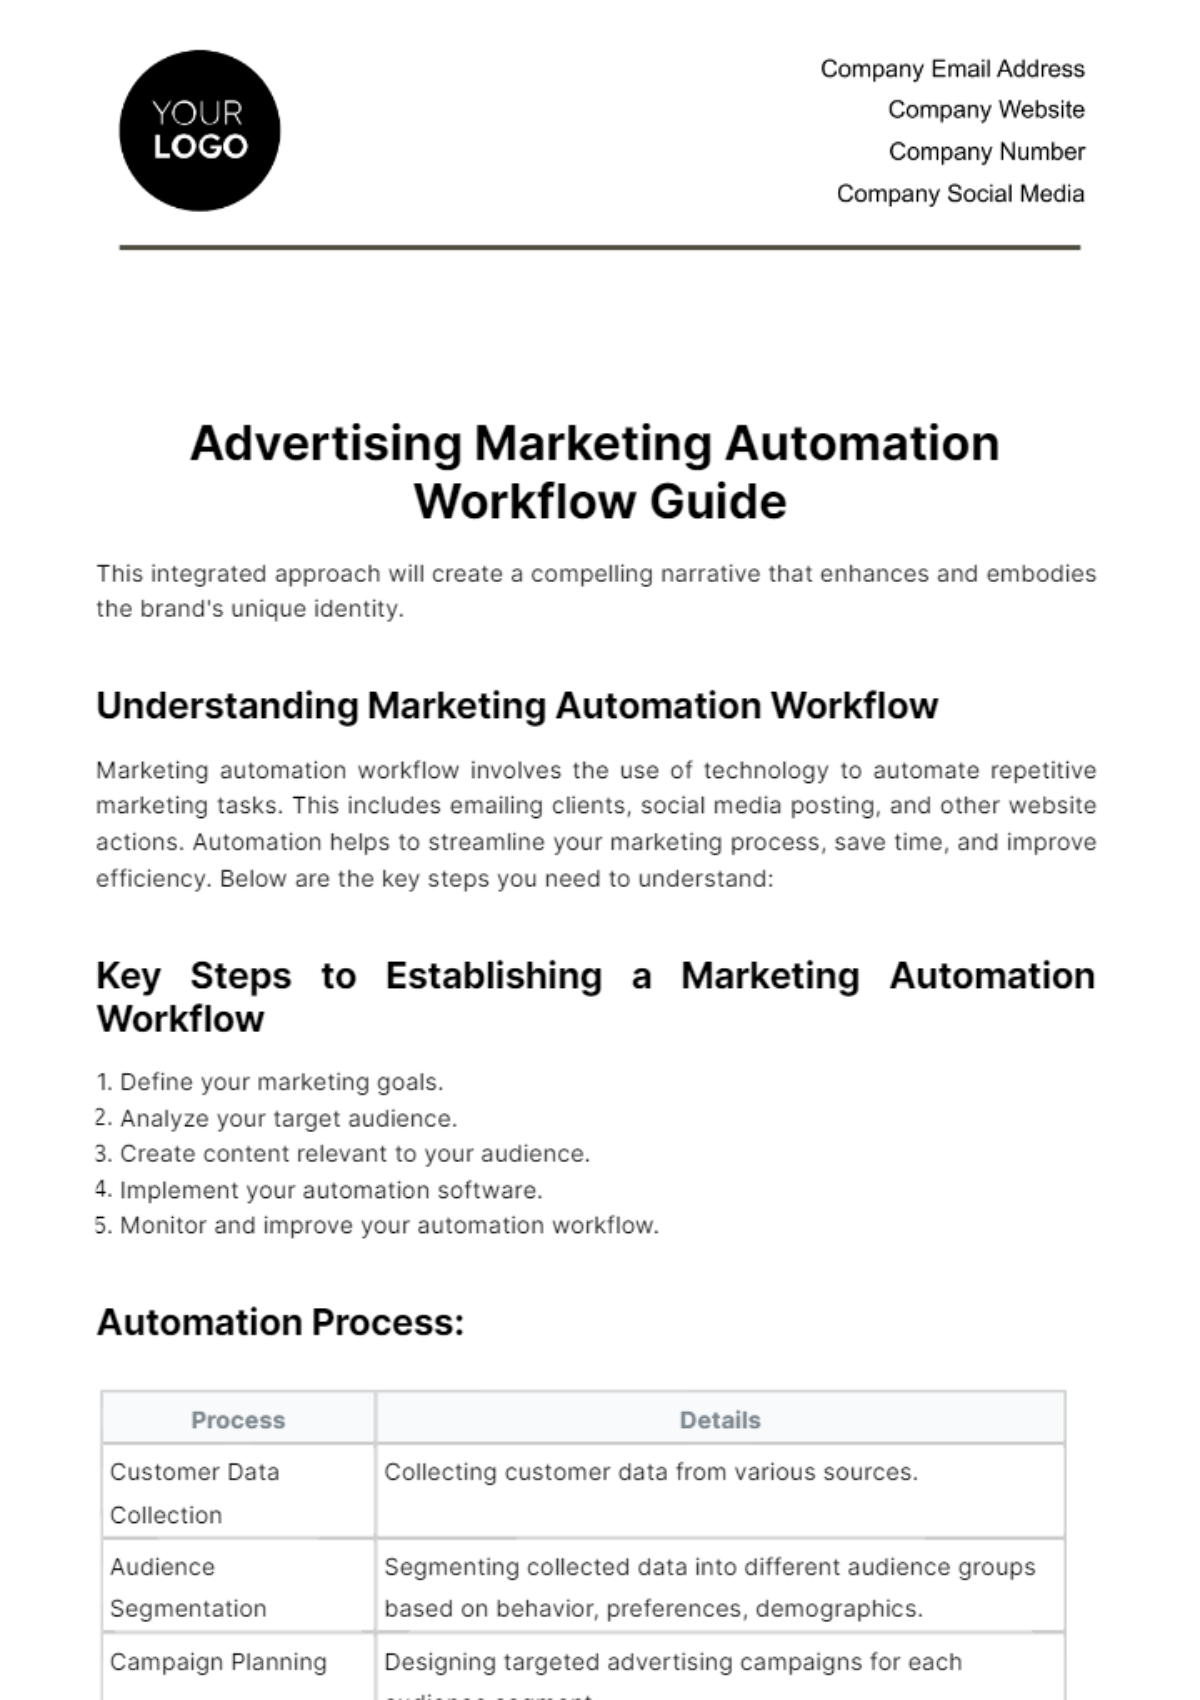 Free Advertising Marketing Automation Workflow Guide Template